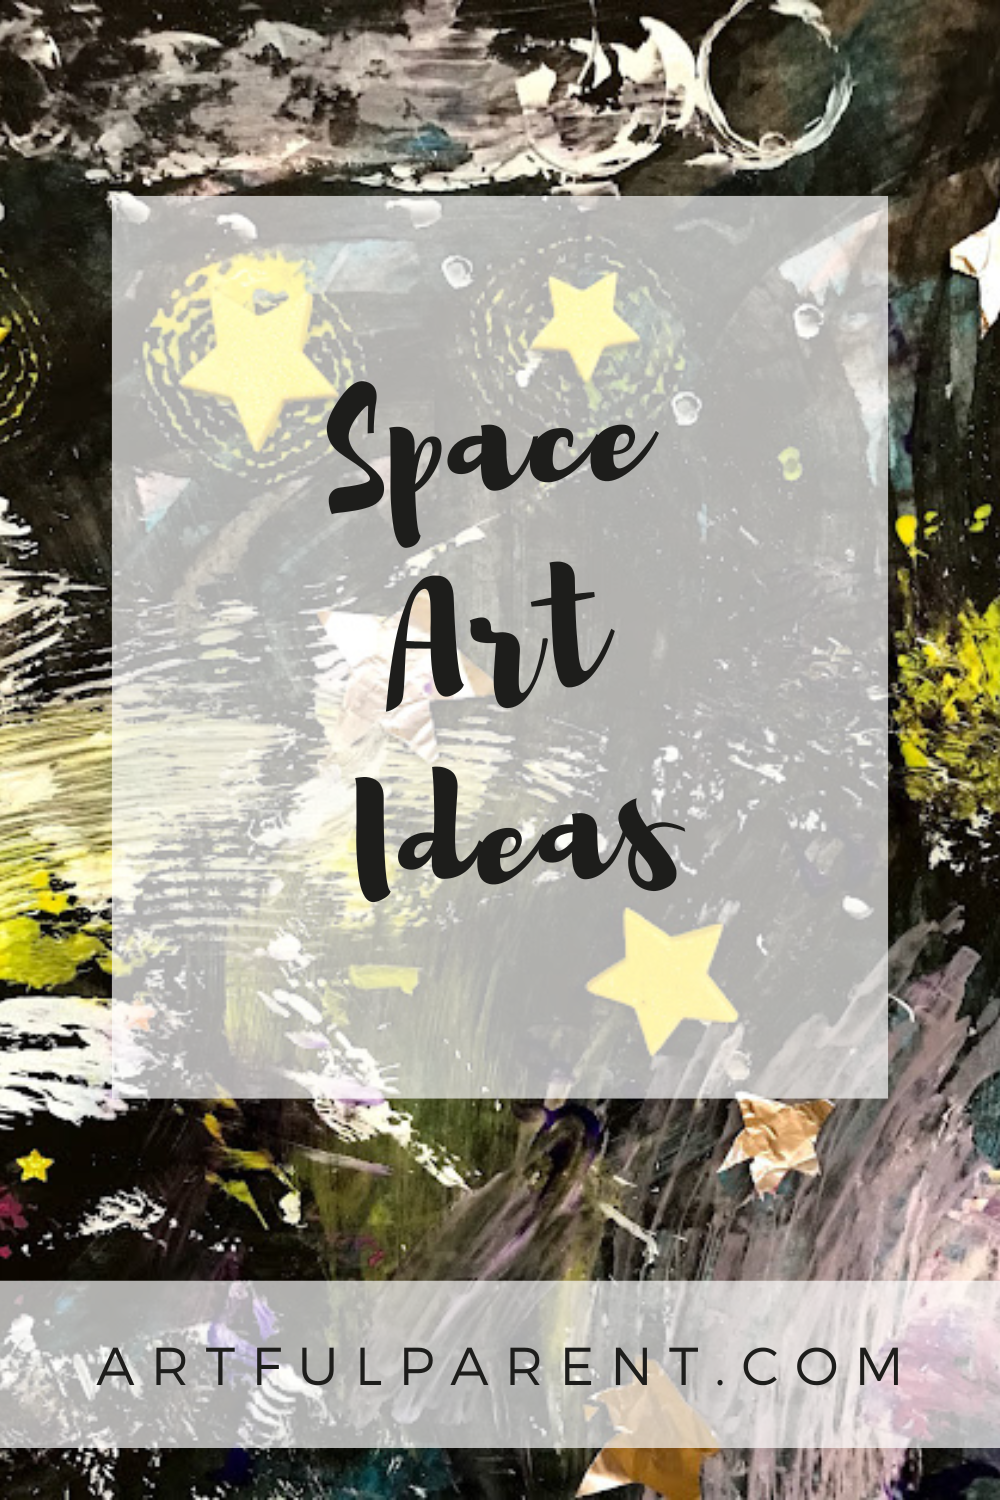 The Best Space Art Ideas for Kids